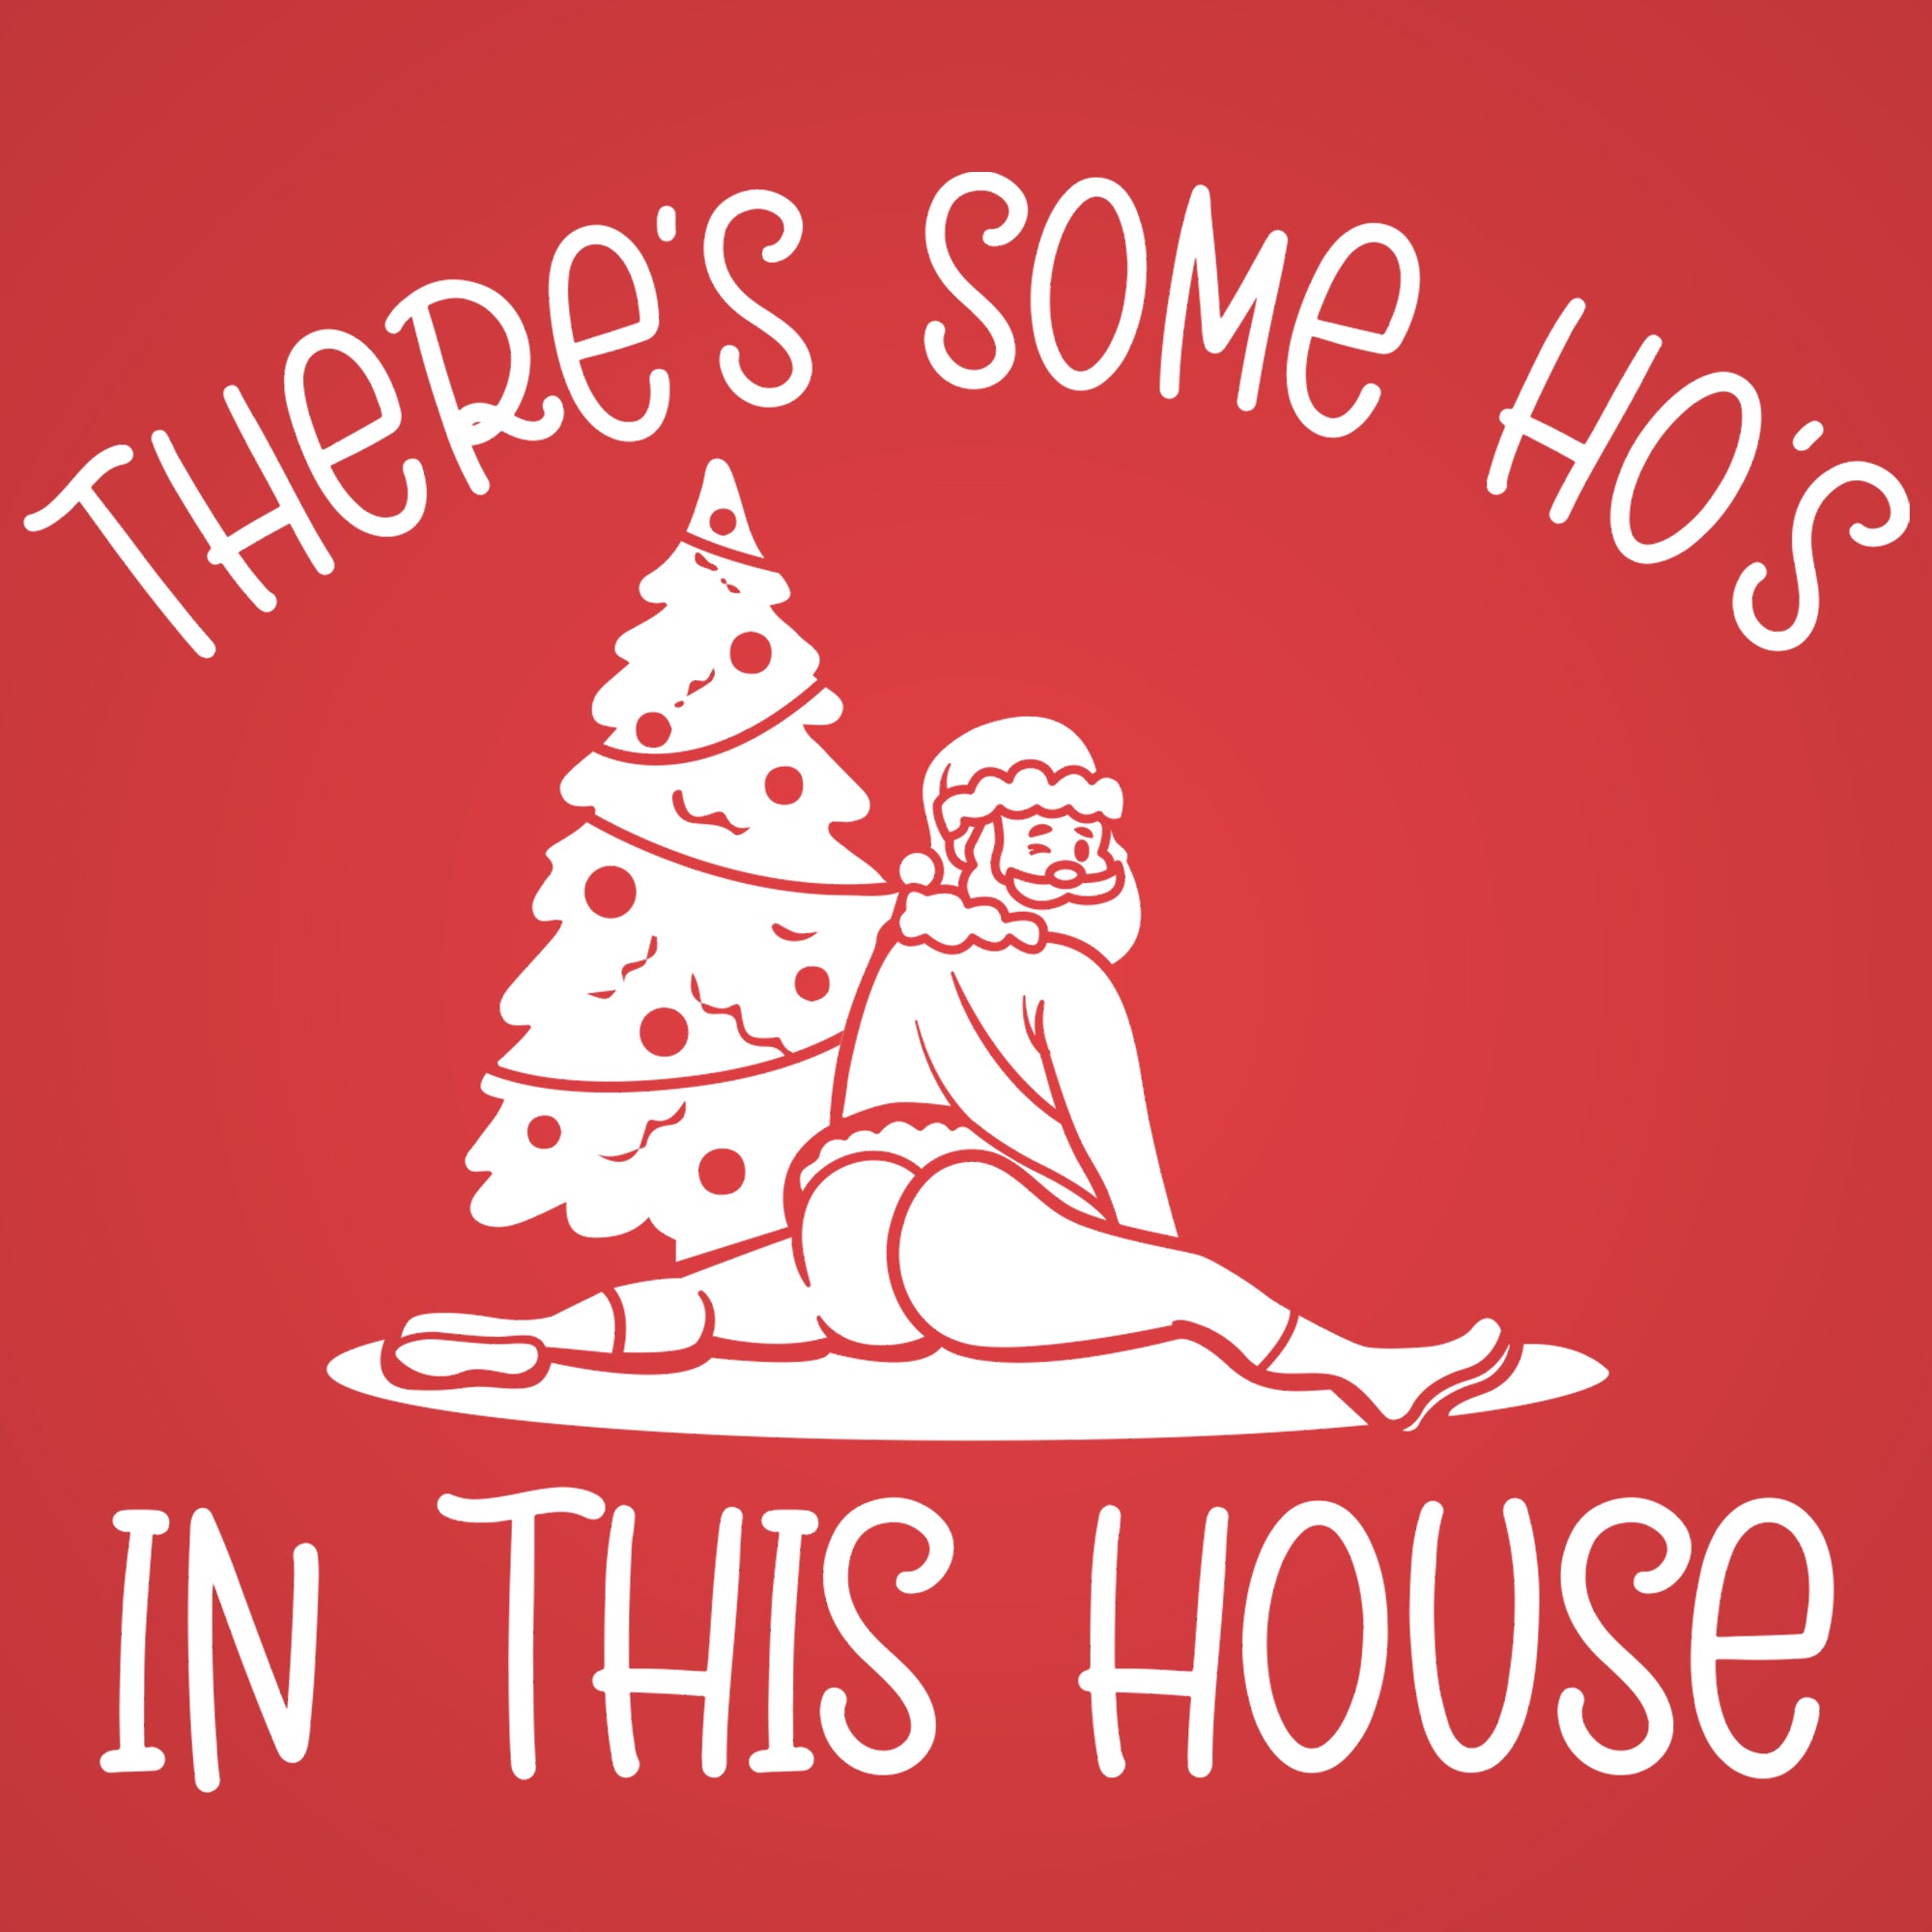 There's Some Hos In This House Tshirt - Donkey Tees